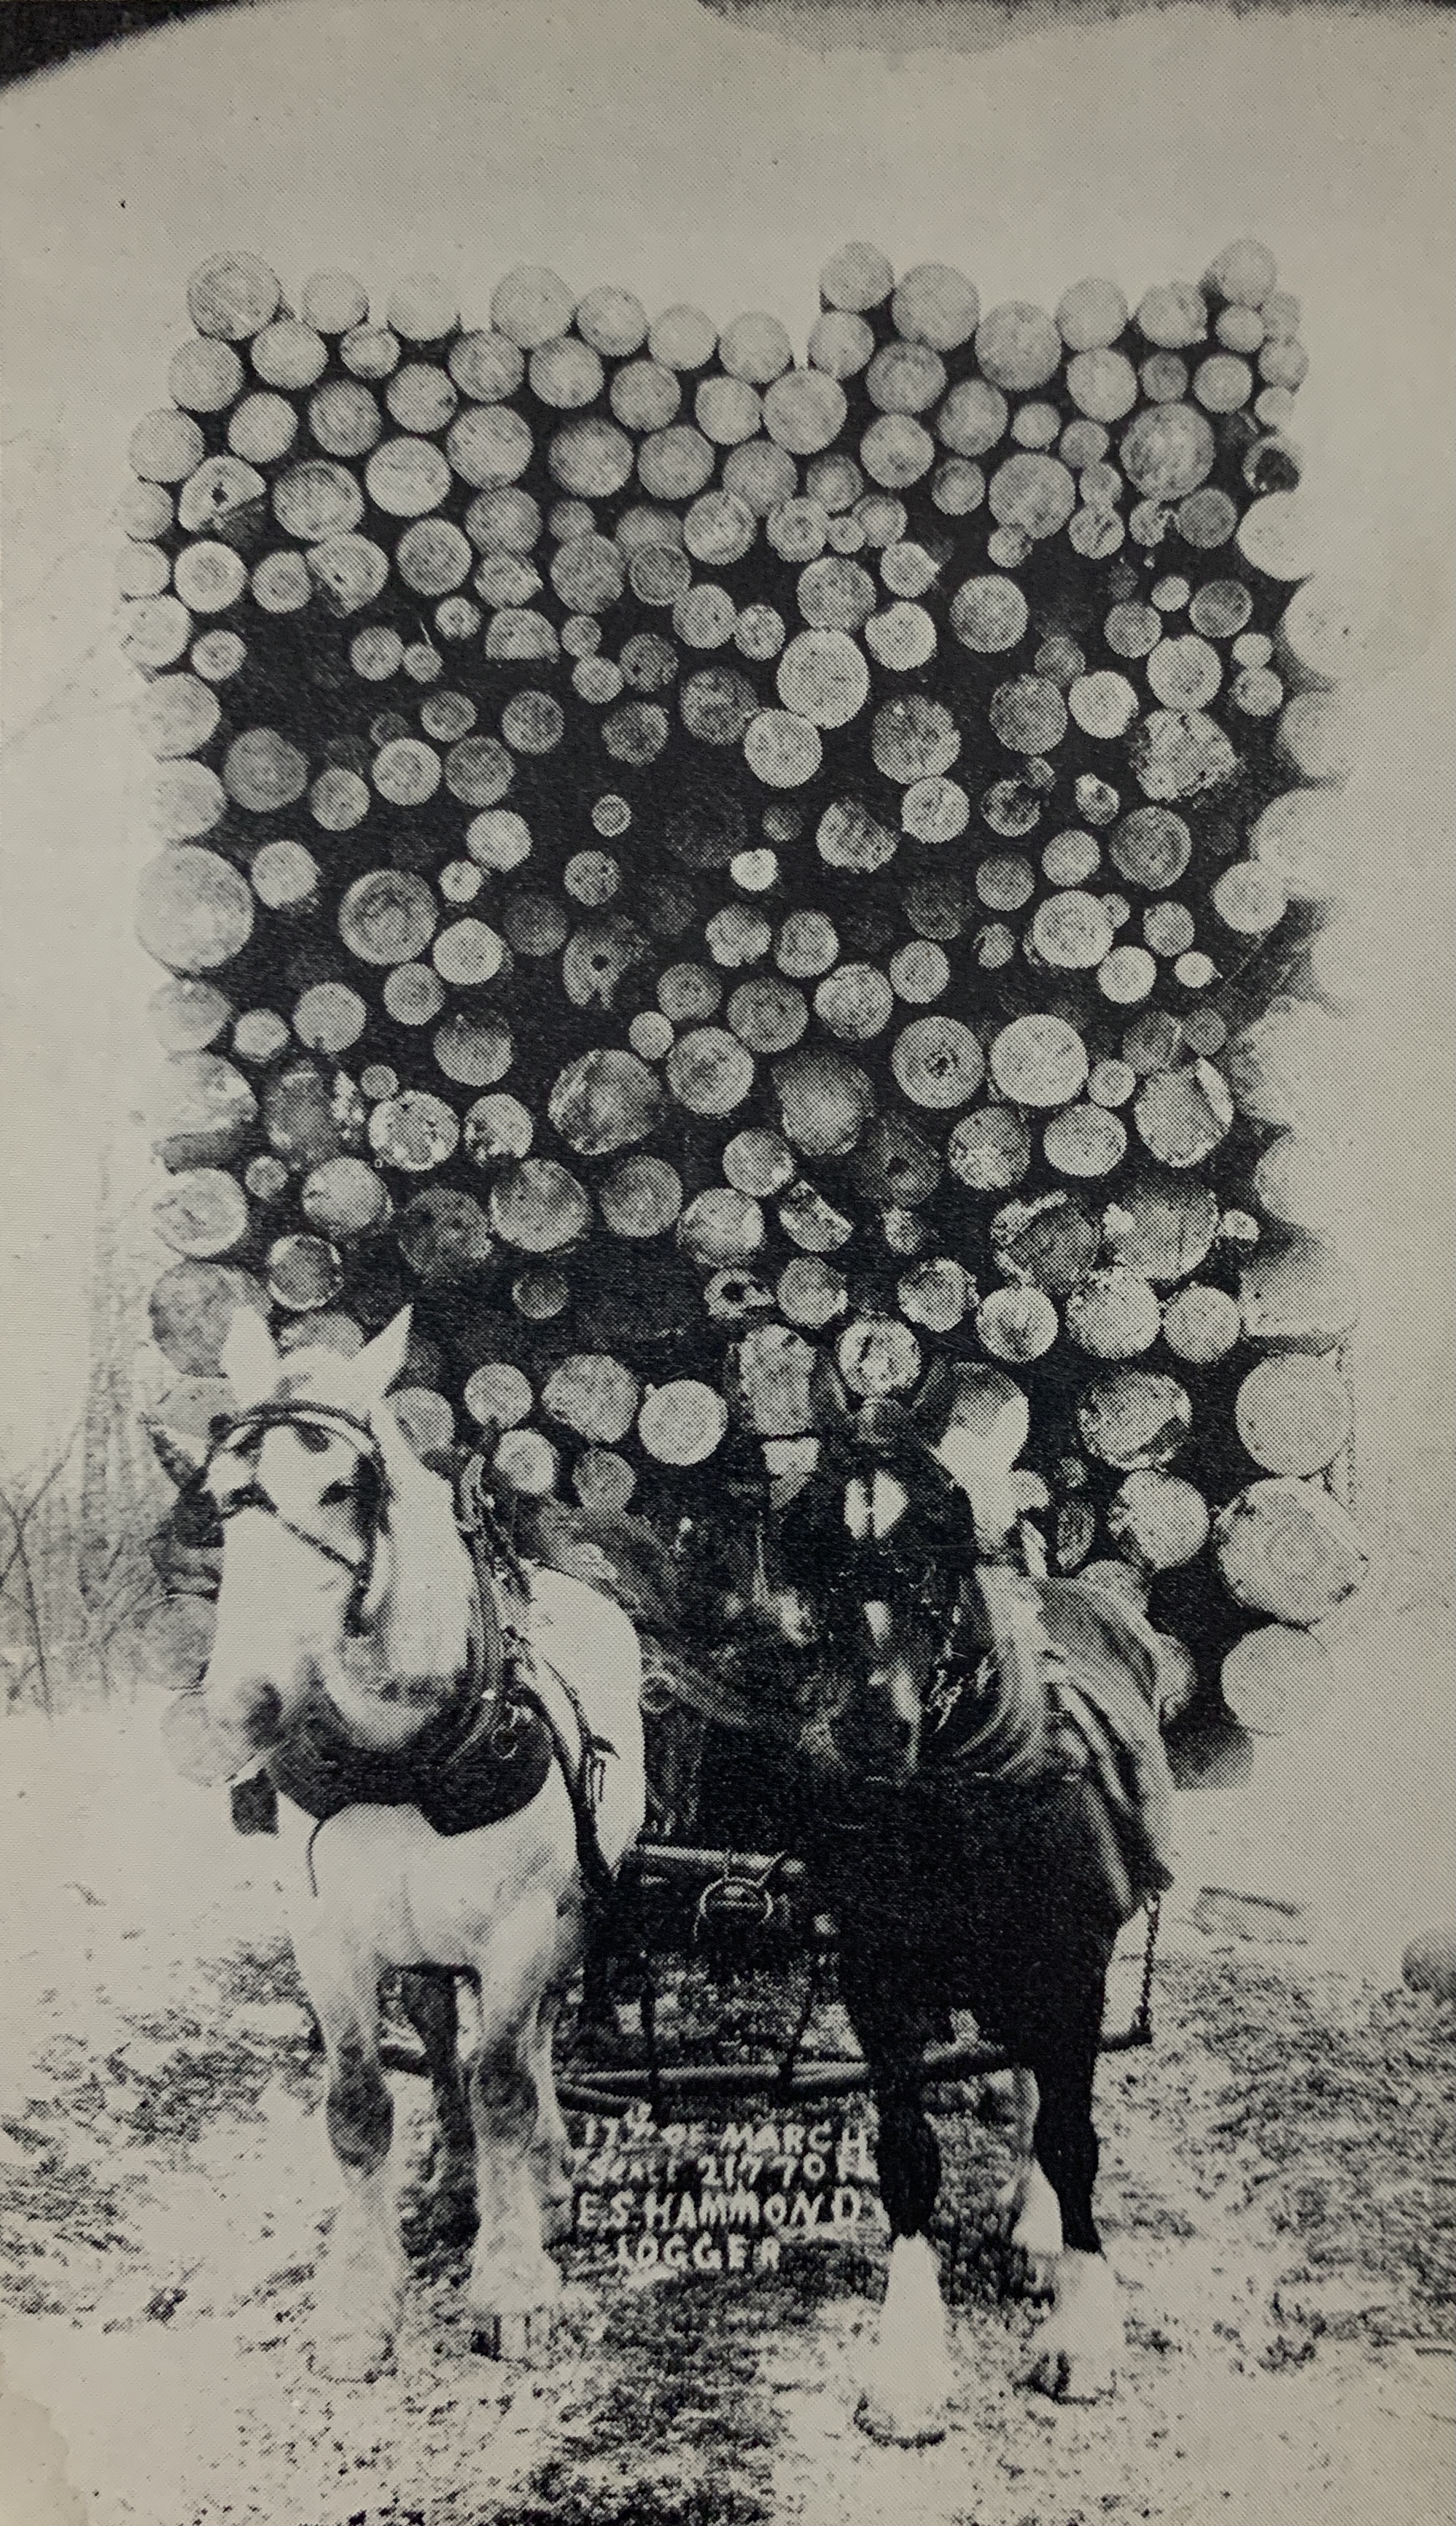 Largest Load of Pine Logs Hauled on Logging Sled in the World.